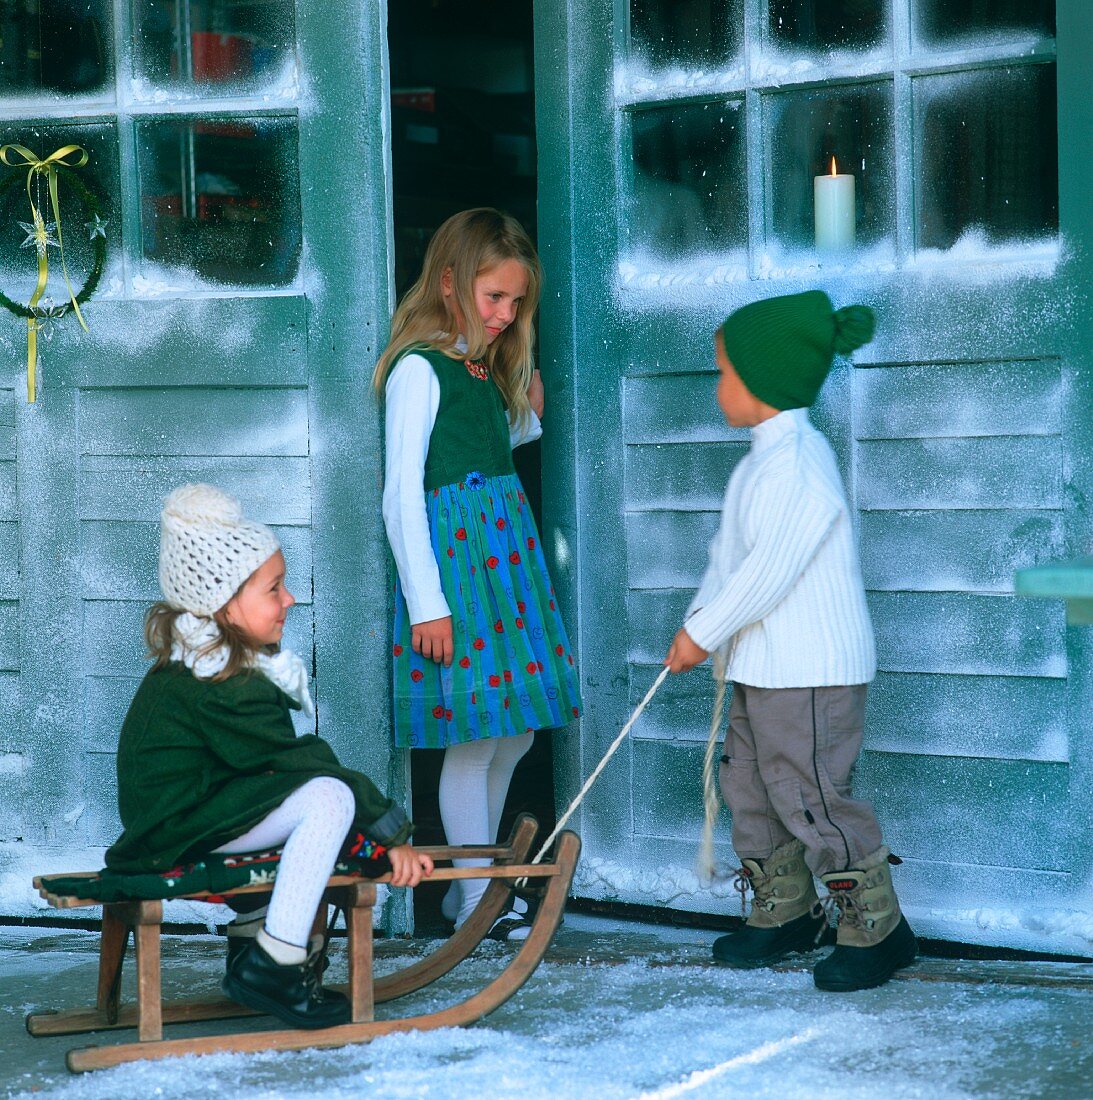 Three children with sledge in front of house